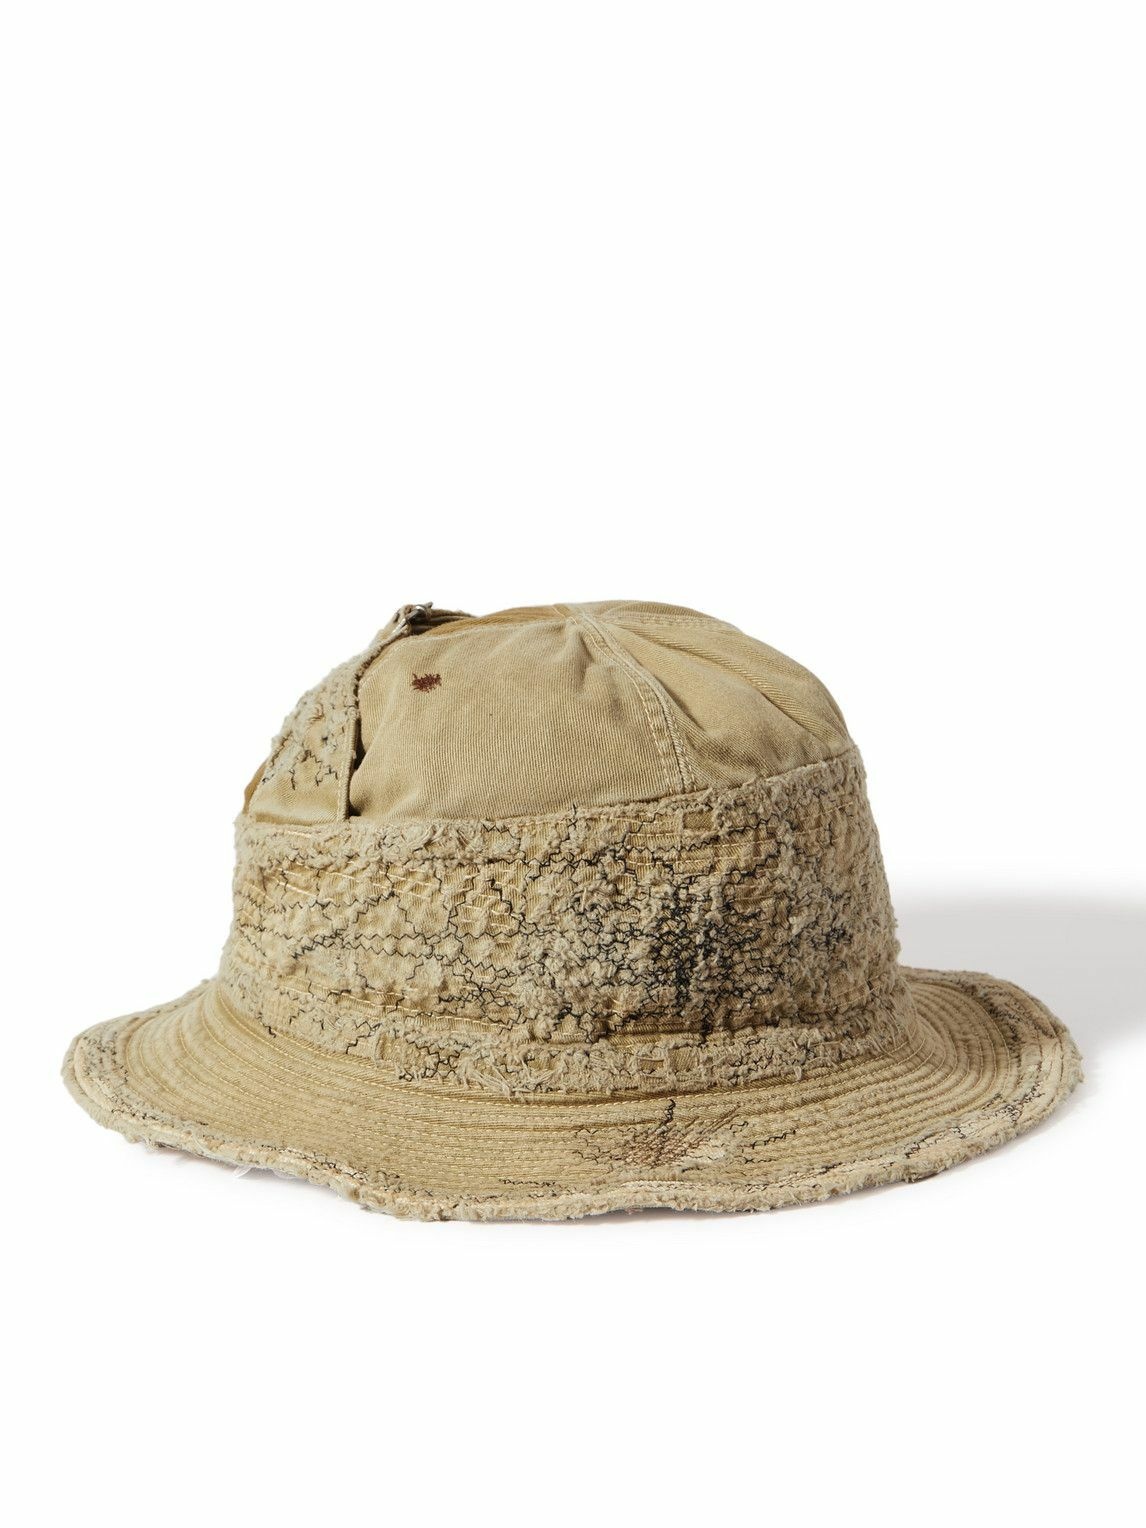 Photo: KAPITAL - The Old Man and the Sea Distressed Buckled Cotton-Twill Bucket Hat